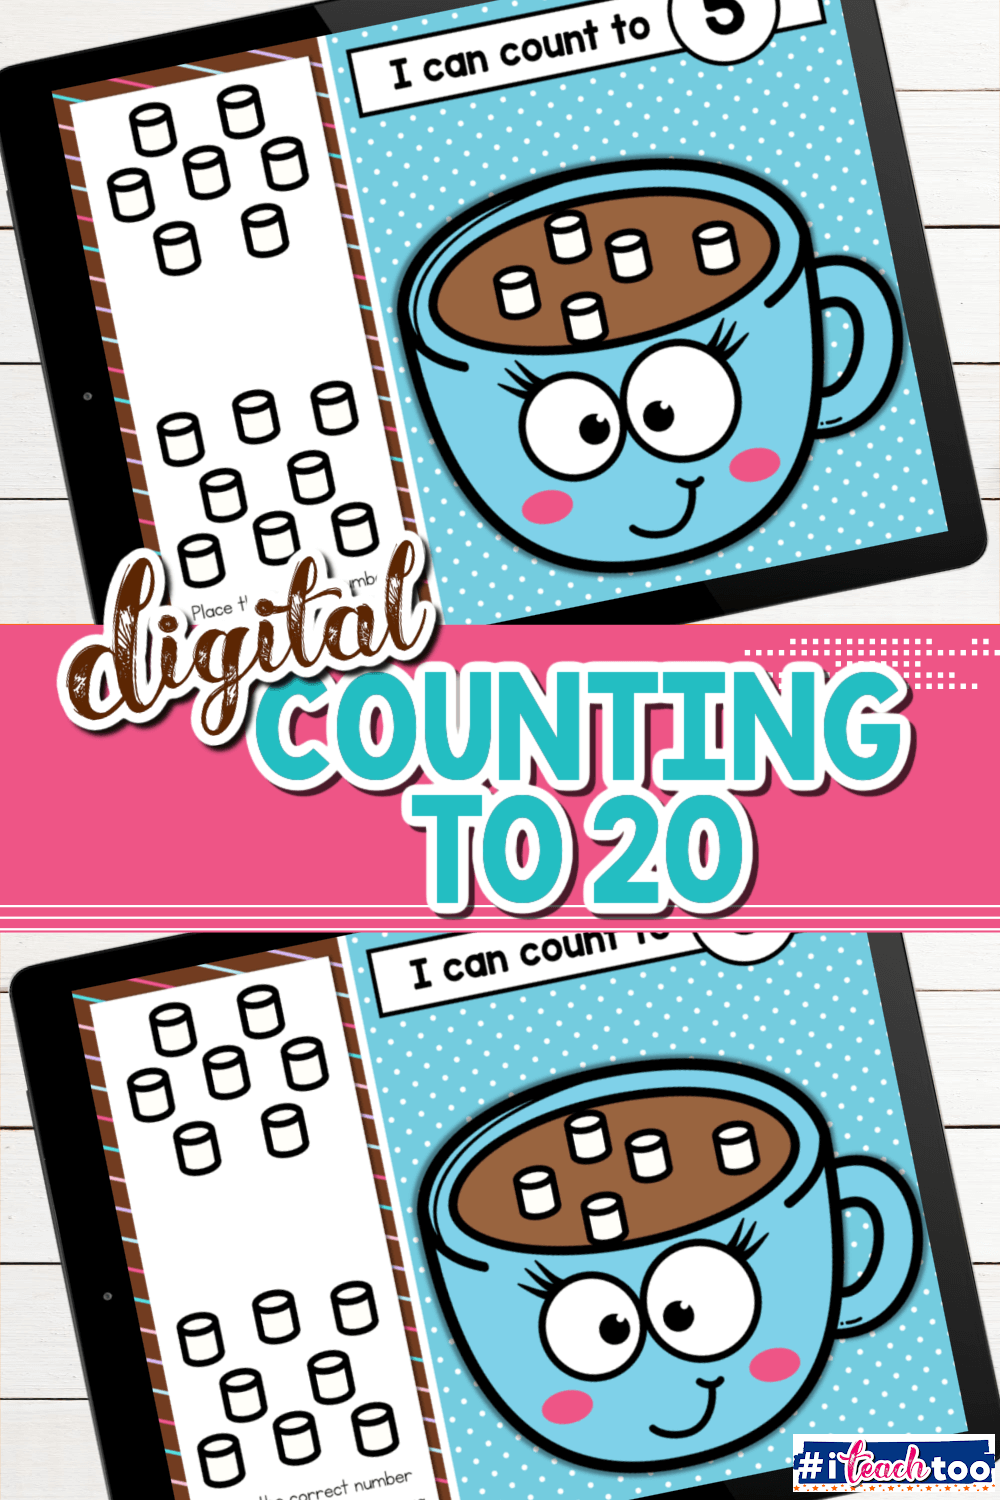 Kindergarten numbers 1-20 counting activity with a hot cocoa theme.